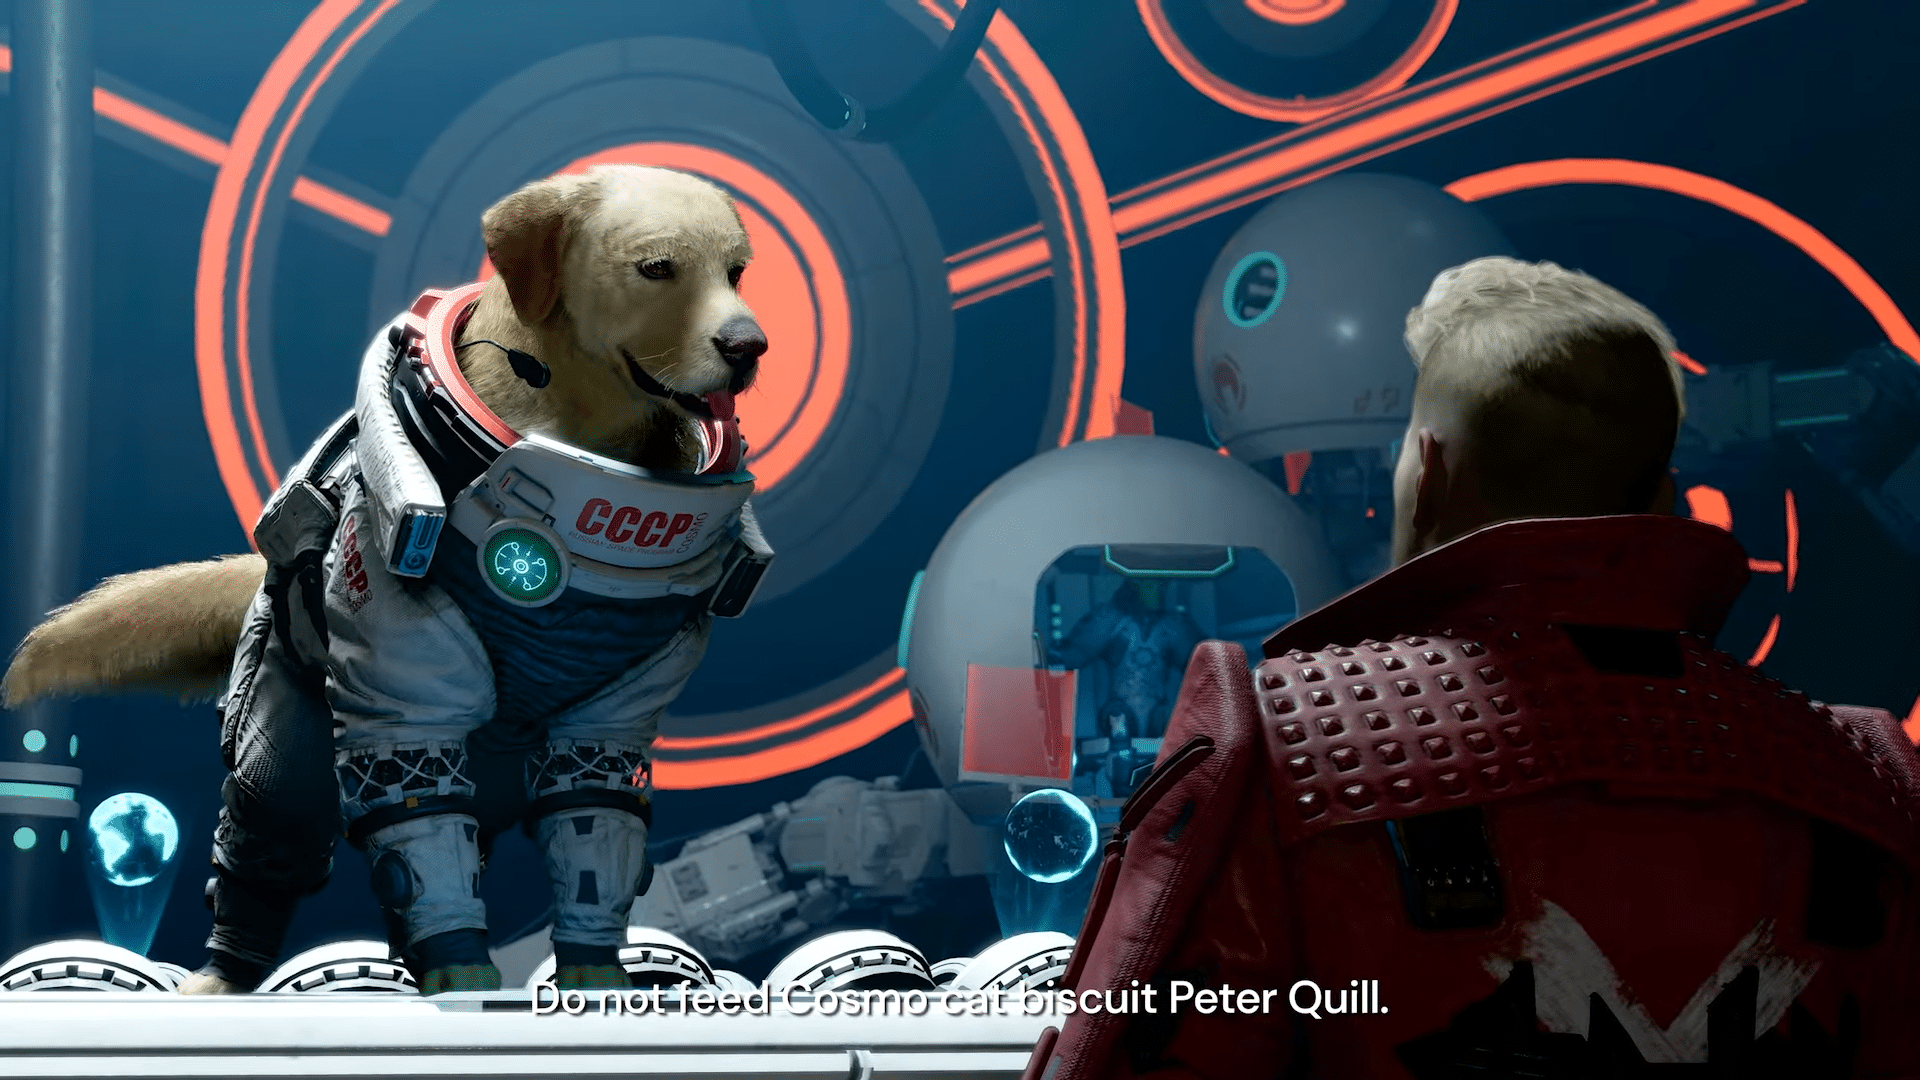 New Marvel’s Guardians of the Galaxy Trailer Highlights Cosmo the Telepathic Space Dog